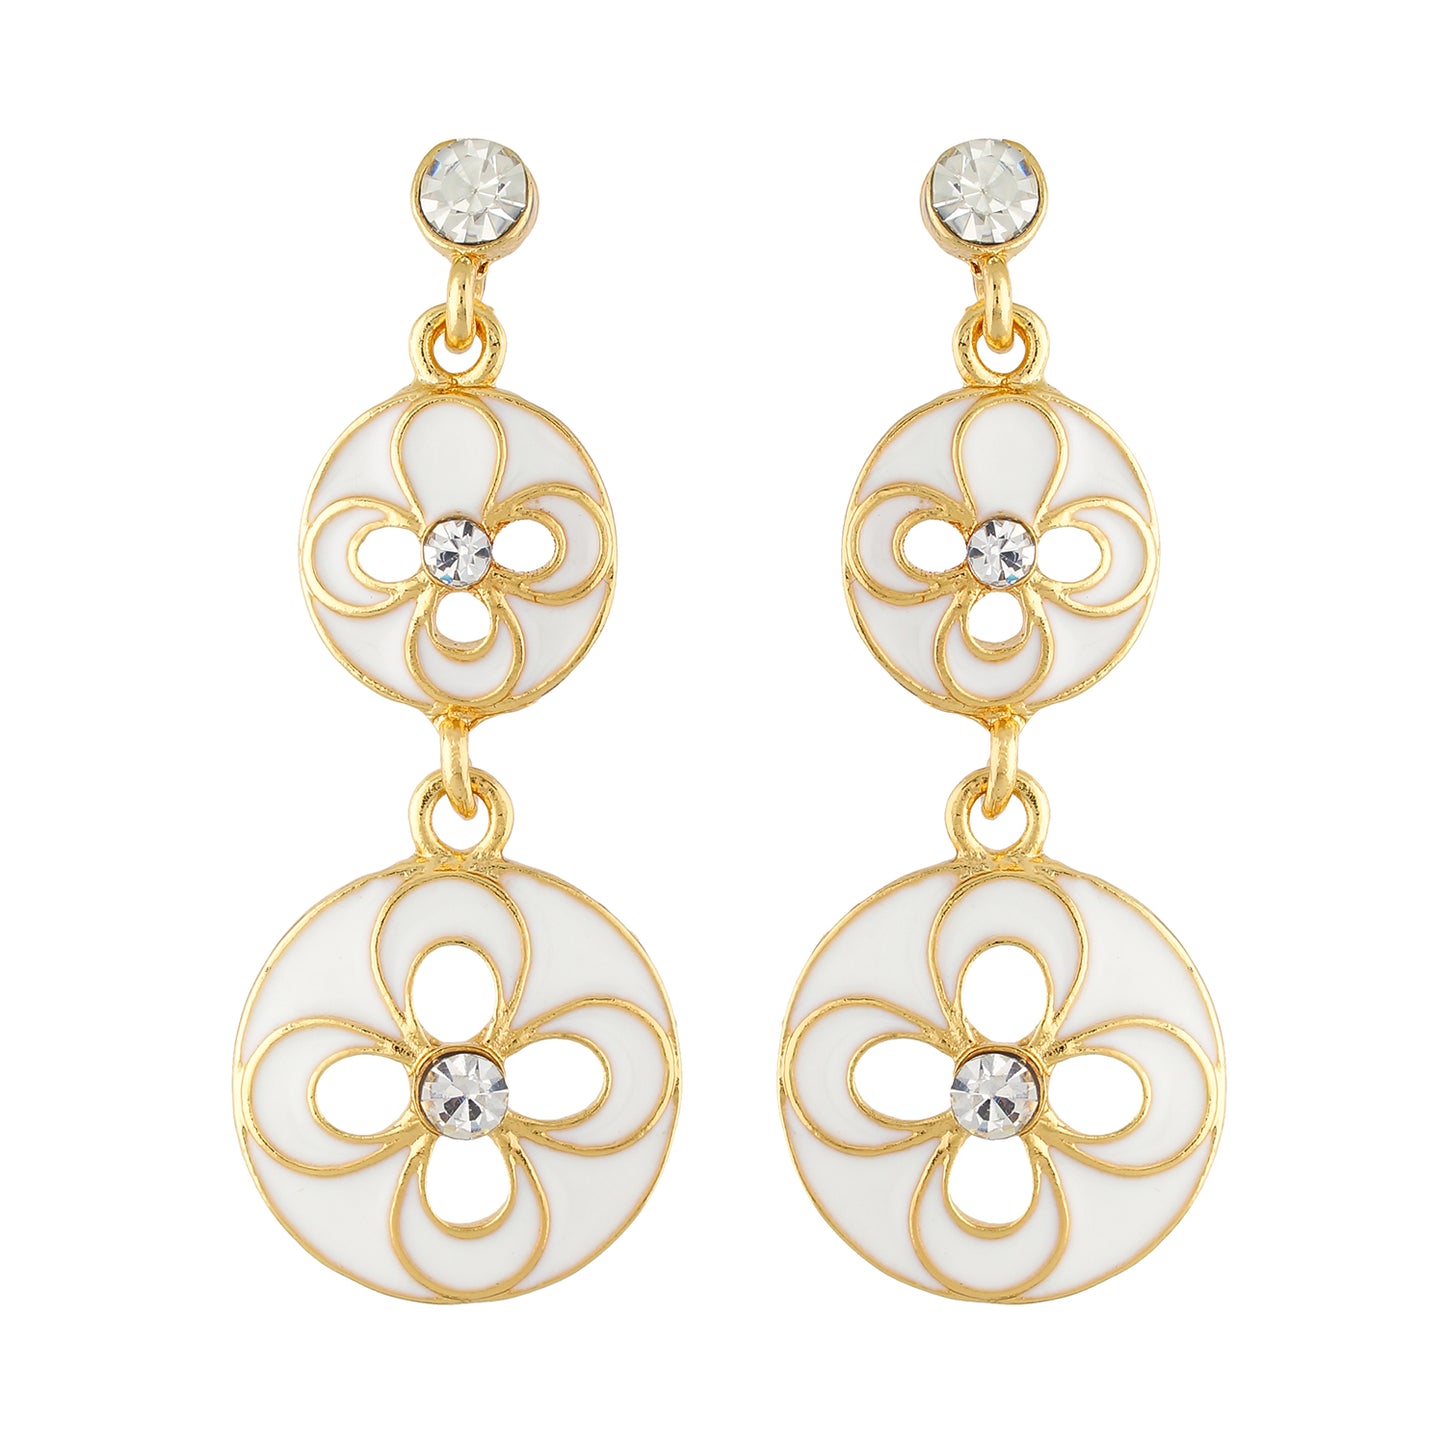 Modish White and Gold Colour Floral and Round Shape Enamel Enhanced Earring for Girls and Women